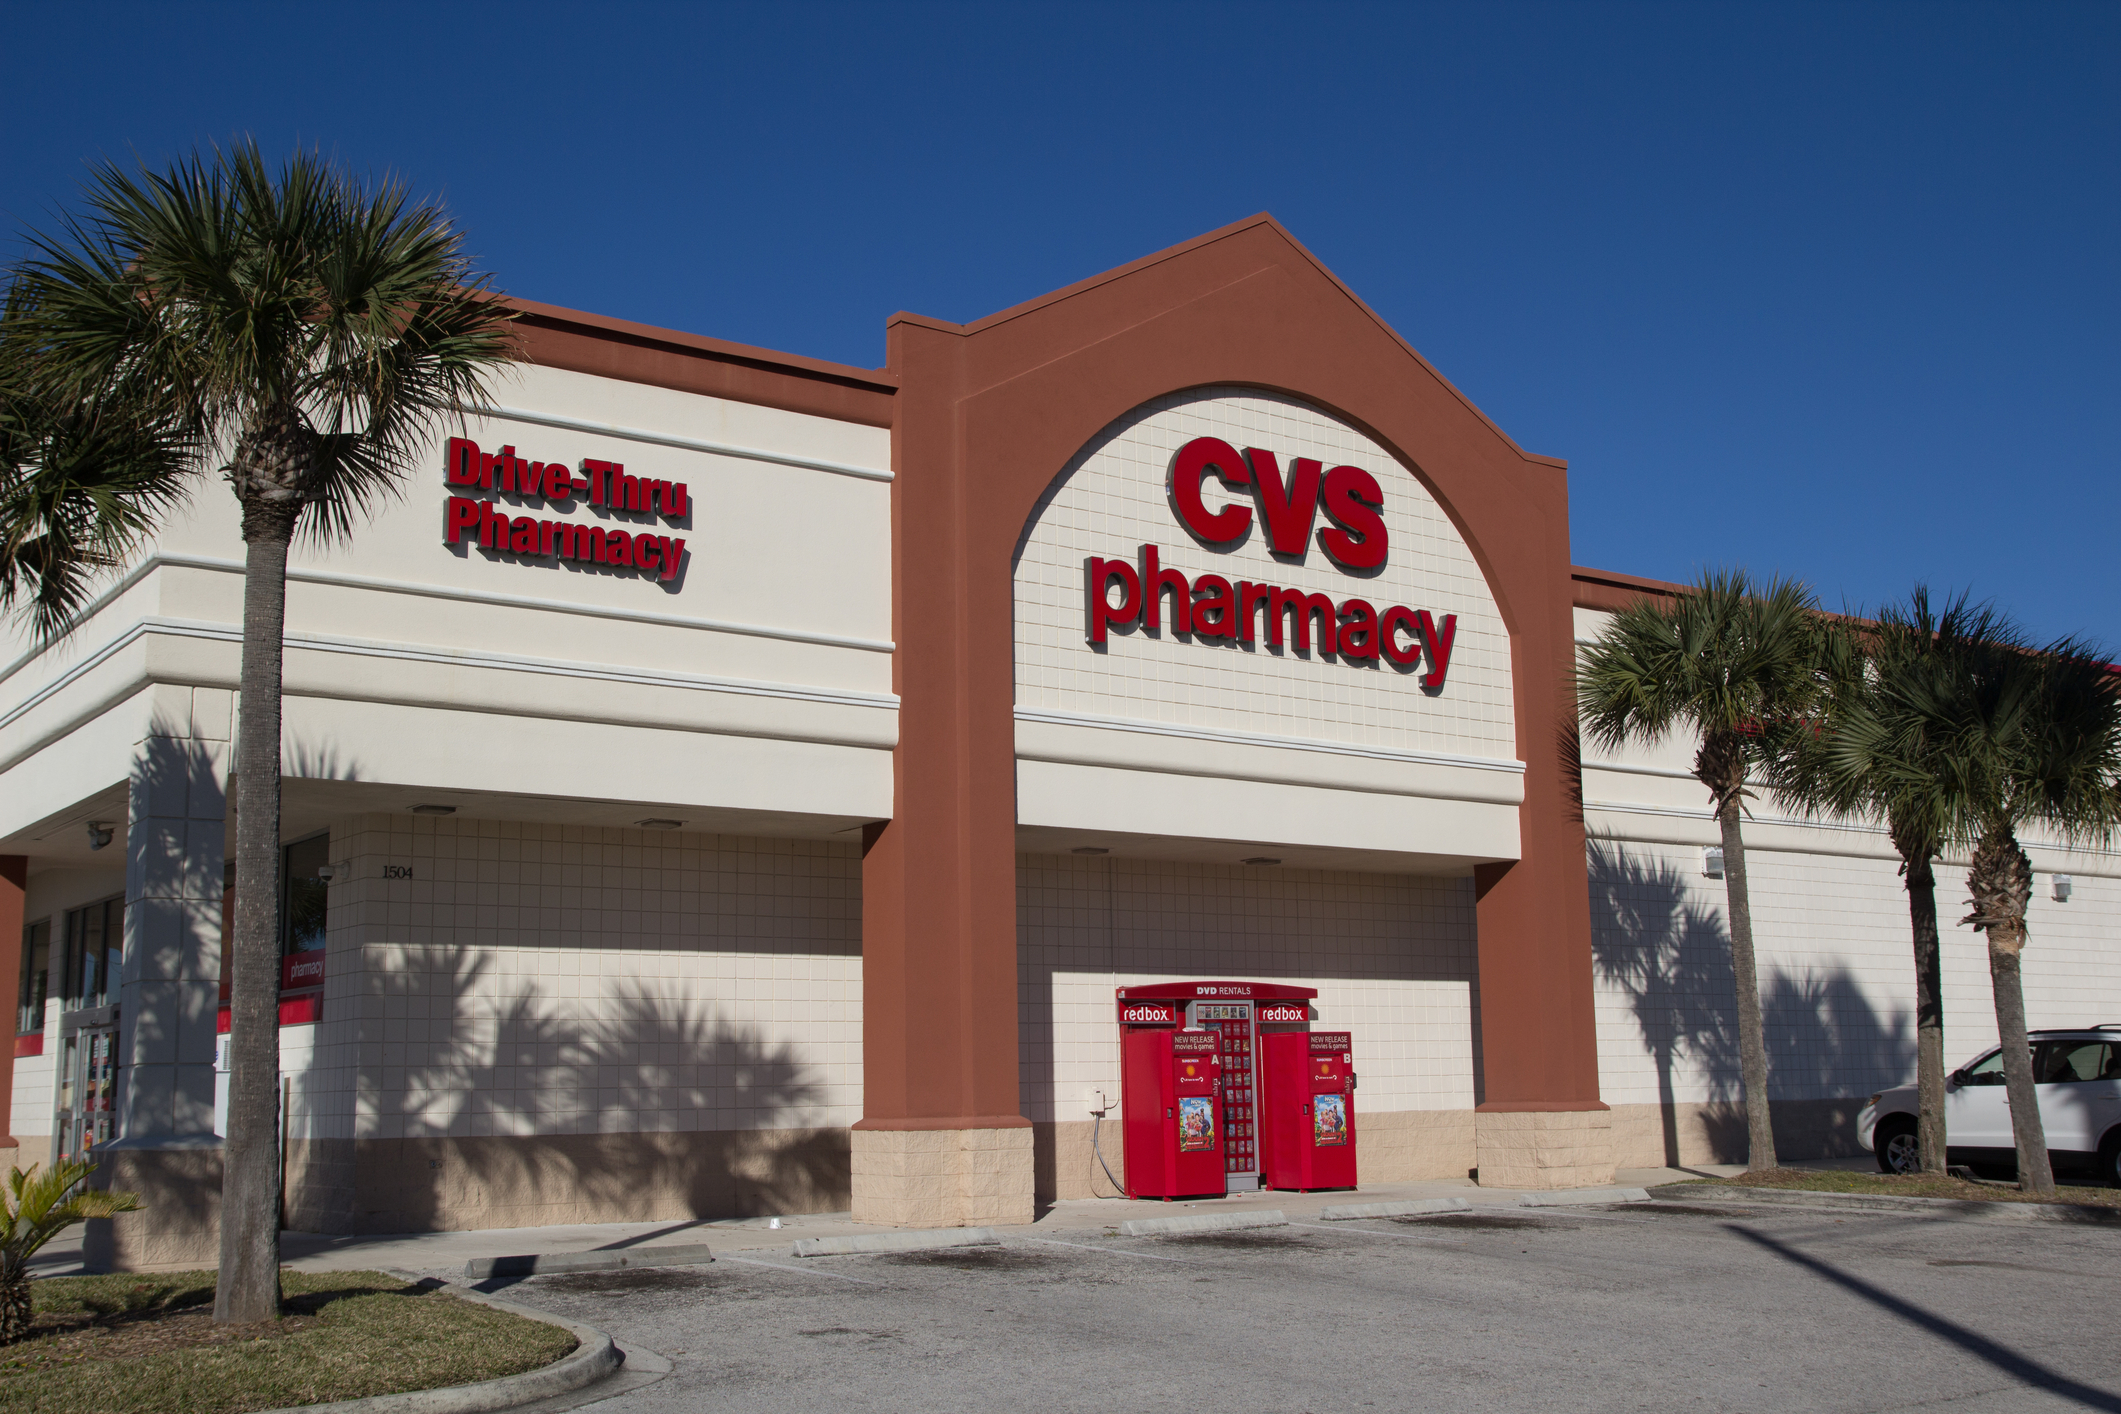 Cvs Coupons Save 15 On An Online Purchase Of 65 Or More - Clark Deals